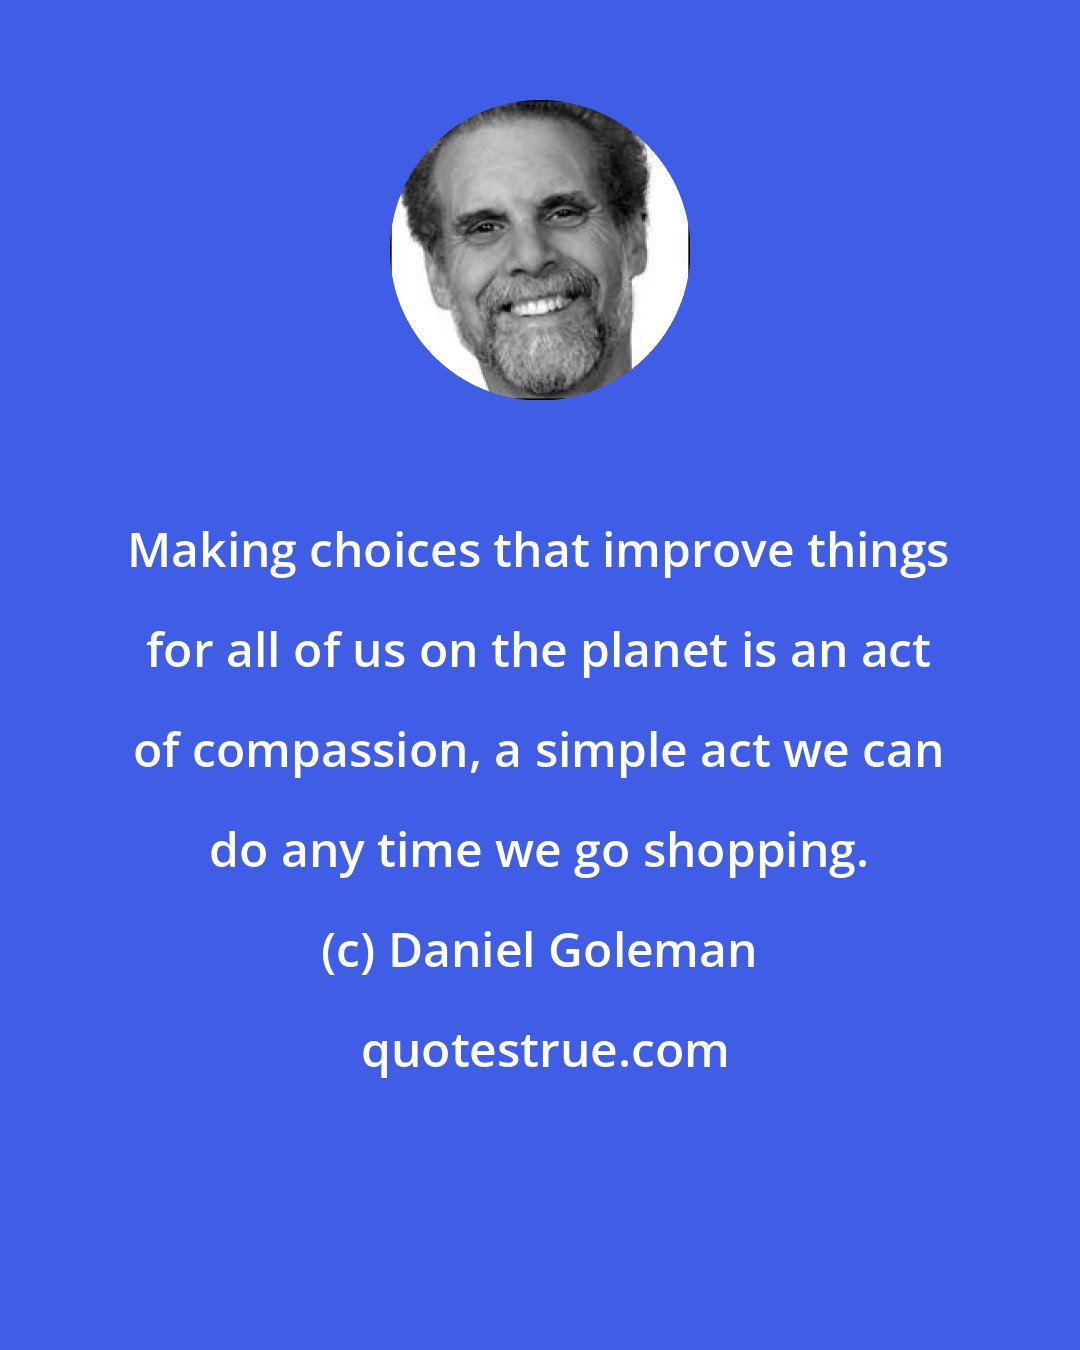 Daniel Goleman: Making choices that improve things for all of us on the planet is an act of compassion, a simple act we can do any time we go shopping.